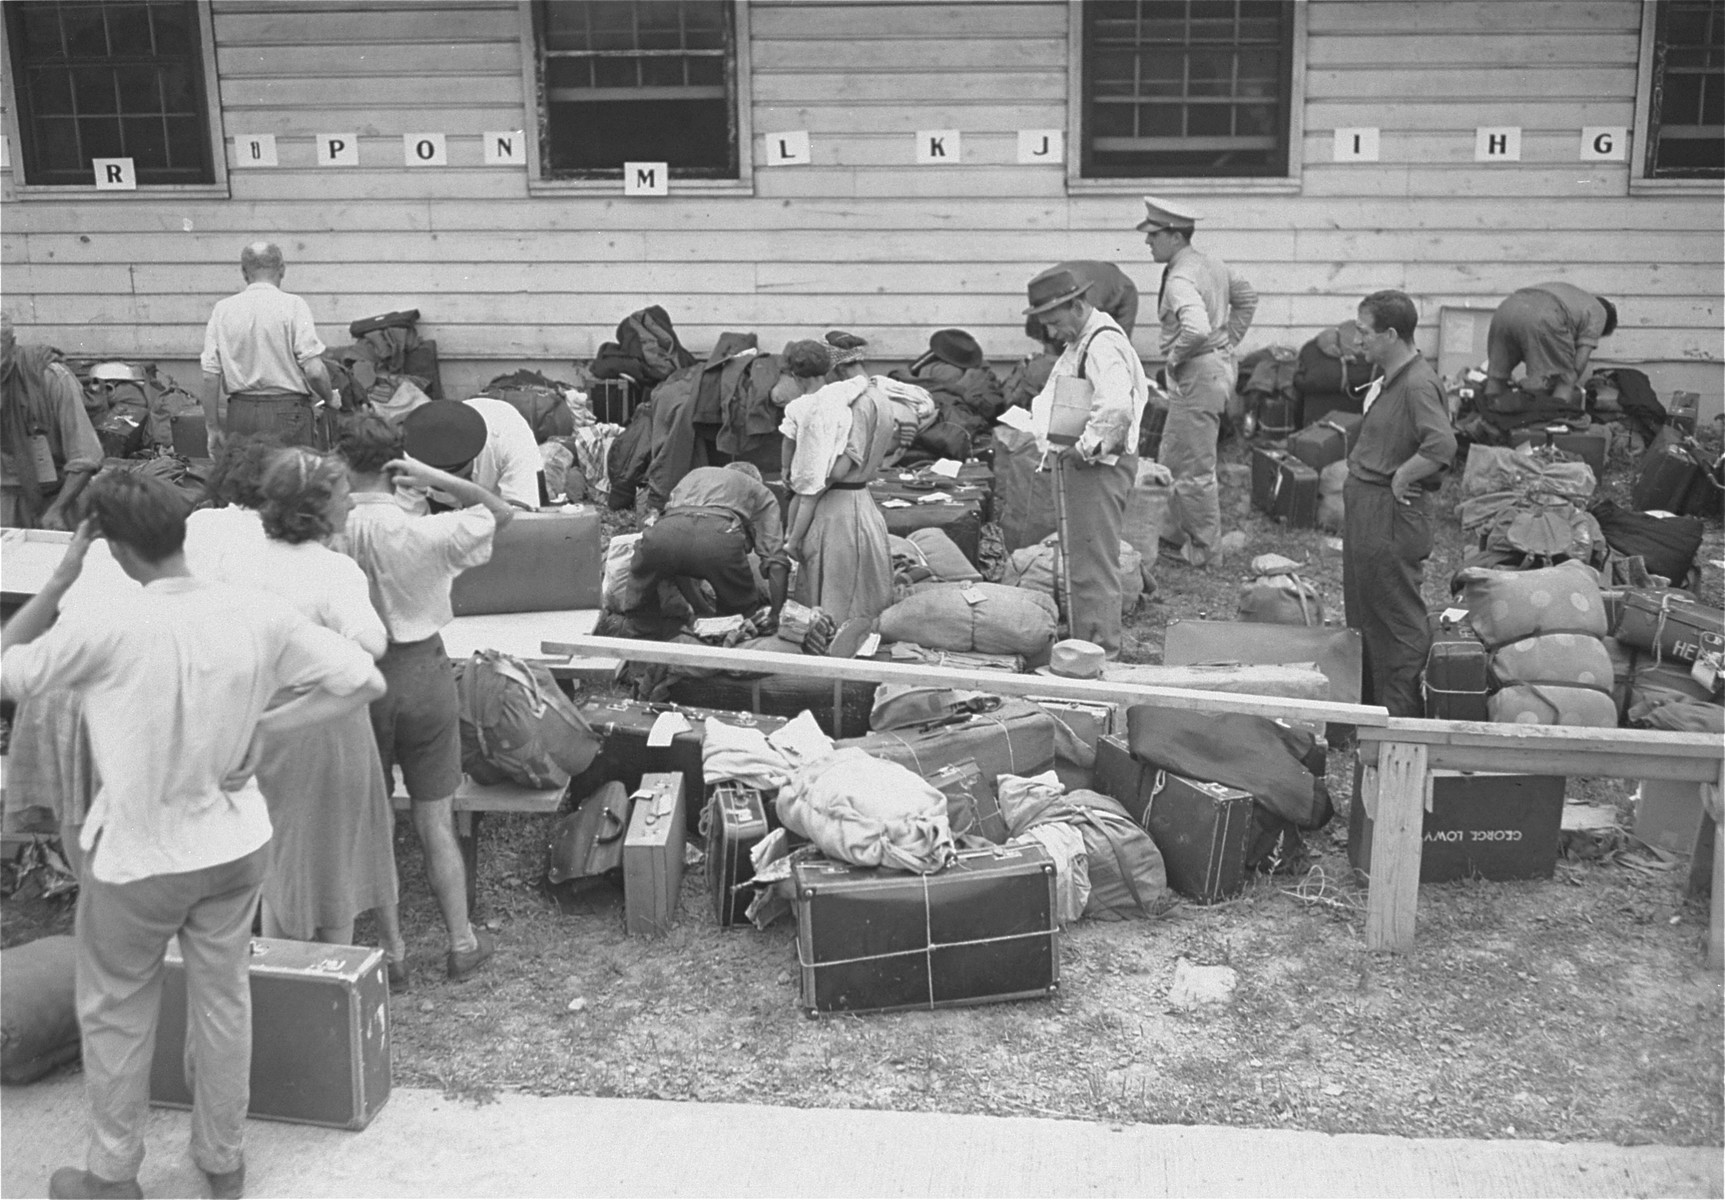 Newly arrived refugees are checked in at the Fort Ontario shelter by representatives of the War Relocation Authority and the U.S. Army; baggage is inspected by U.S. customs officials.